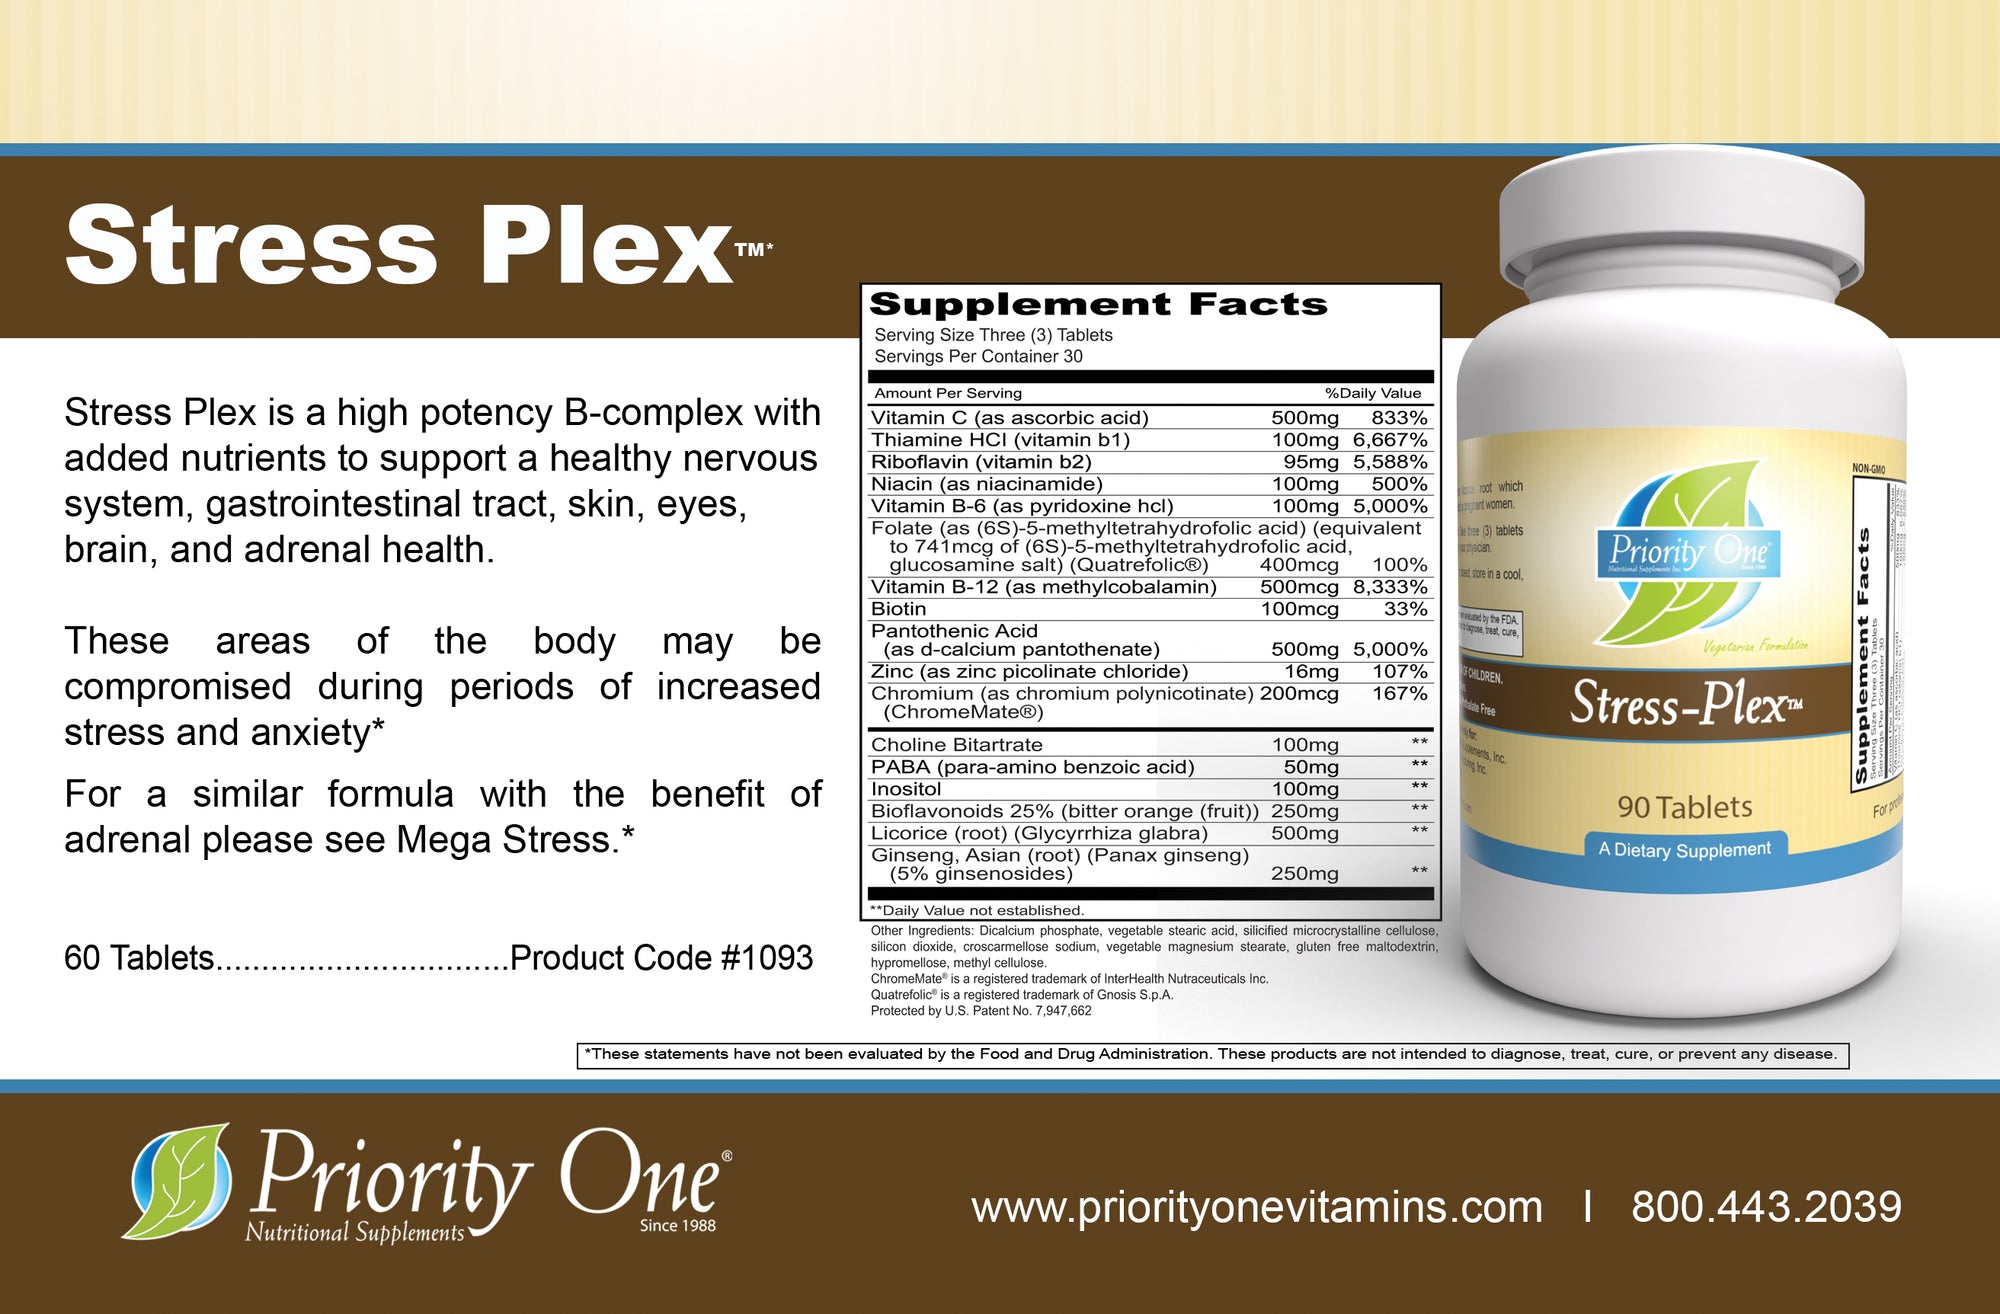 Stress Plex (90 Tablets) Stress Plex features a high-potency B-complex formula for stress and anxiety with added nutrients to support an overall healthy nervous system.*